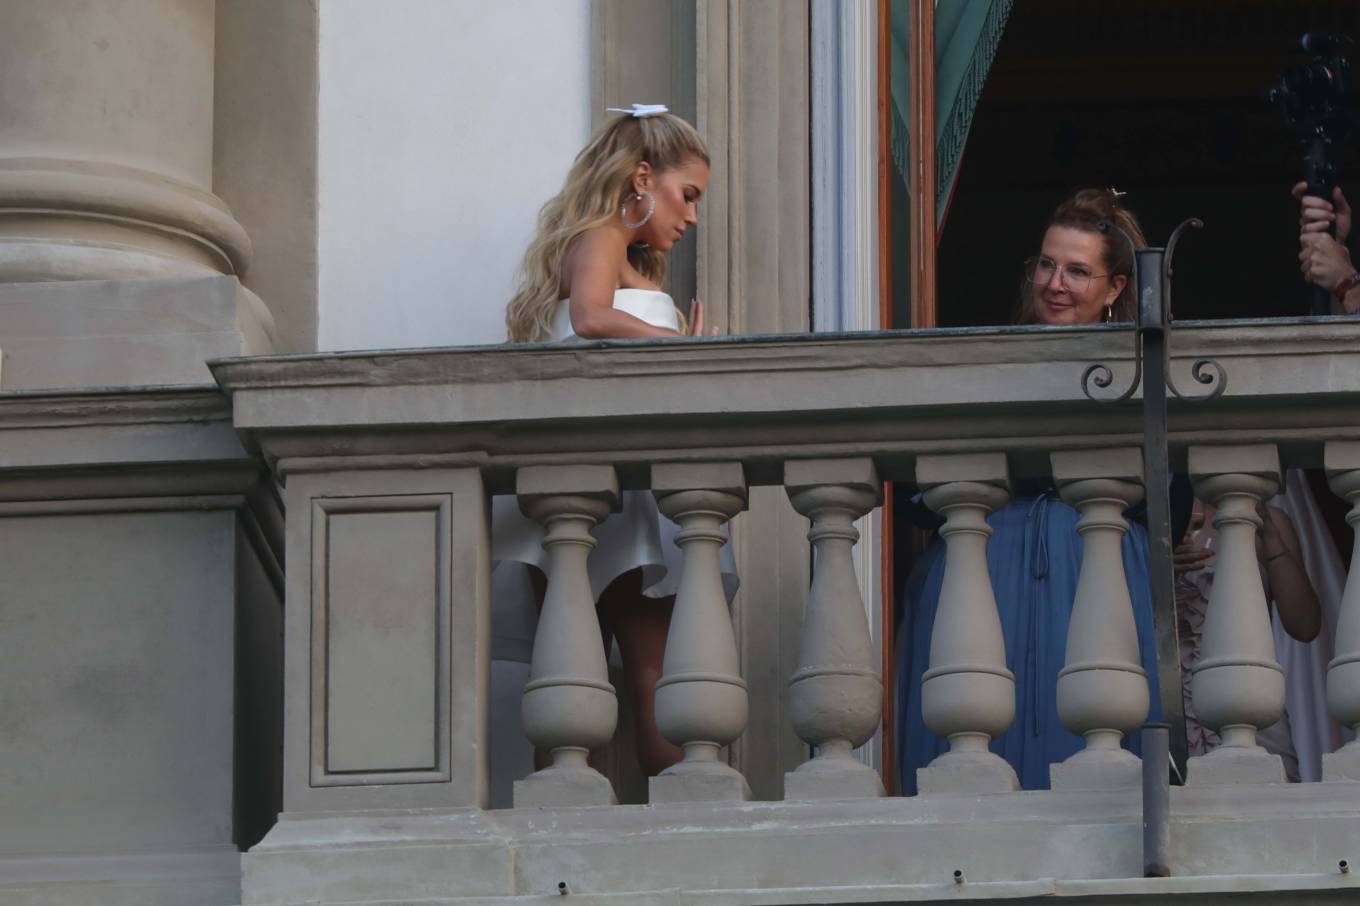 Sylvie Meis - Photoshoot candids in Florence